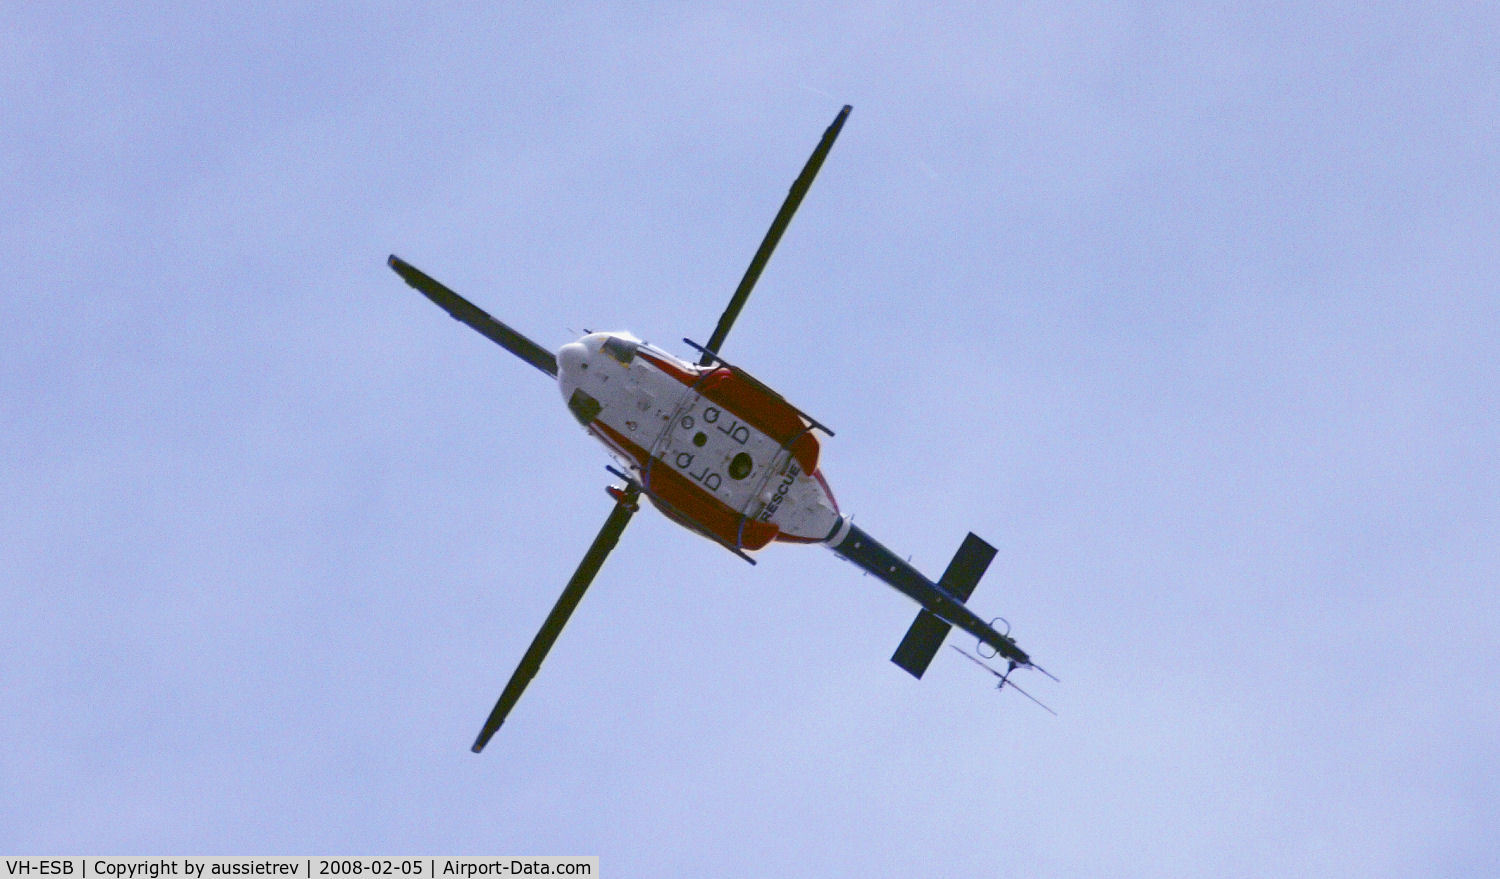 VH-ESB, 1994 Bell 412EP C/N 36087, On duty over the Gold Coast during widespread flooding